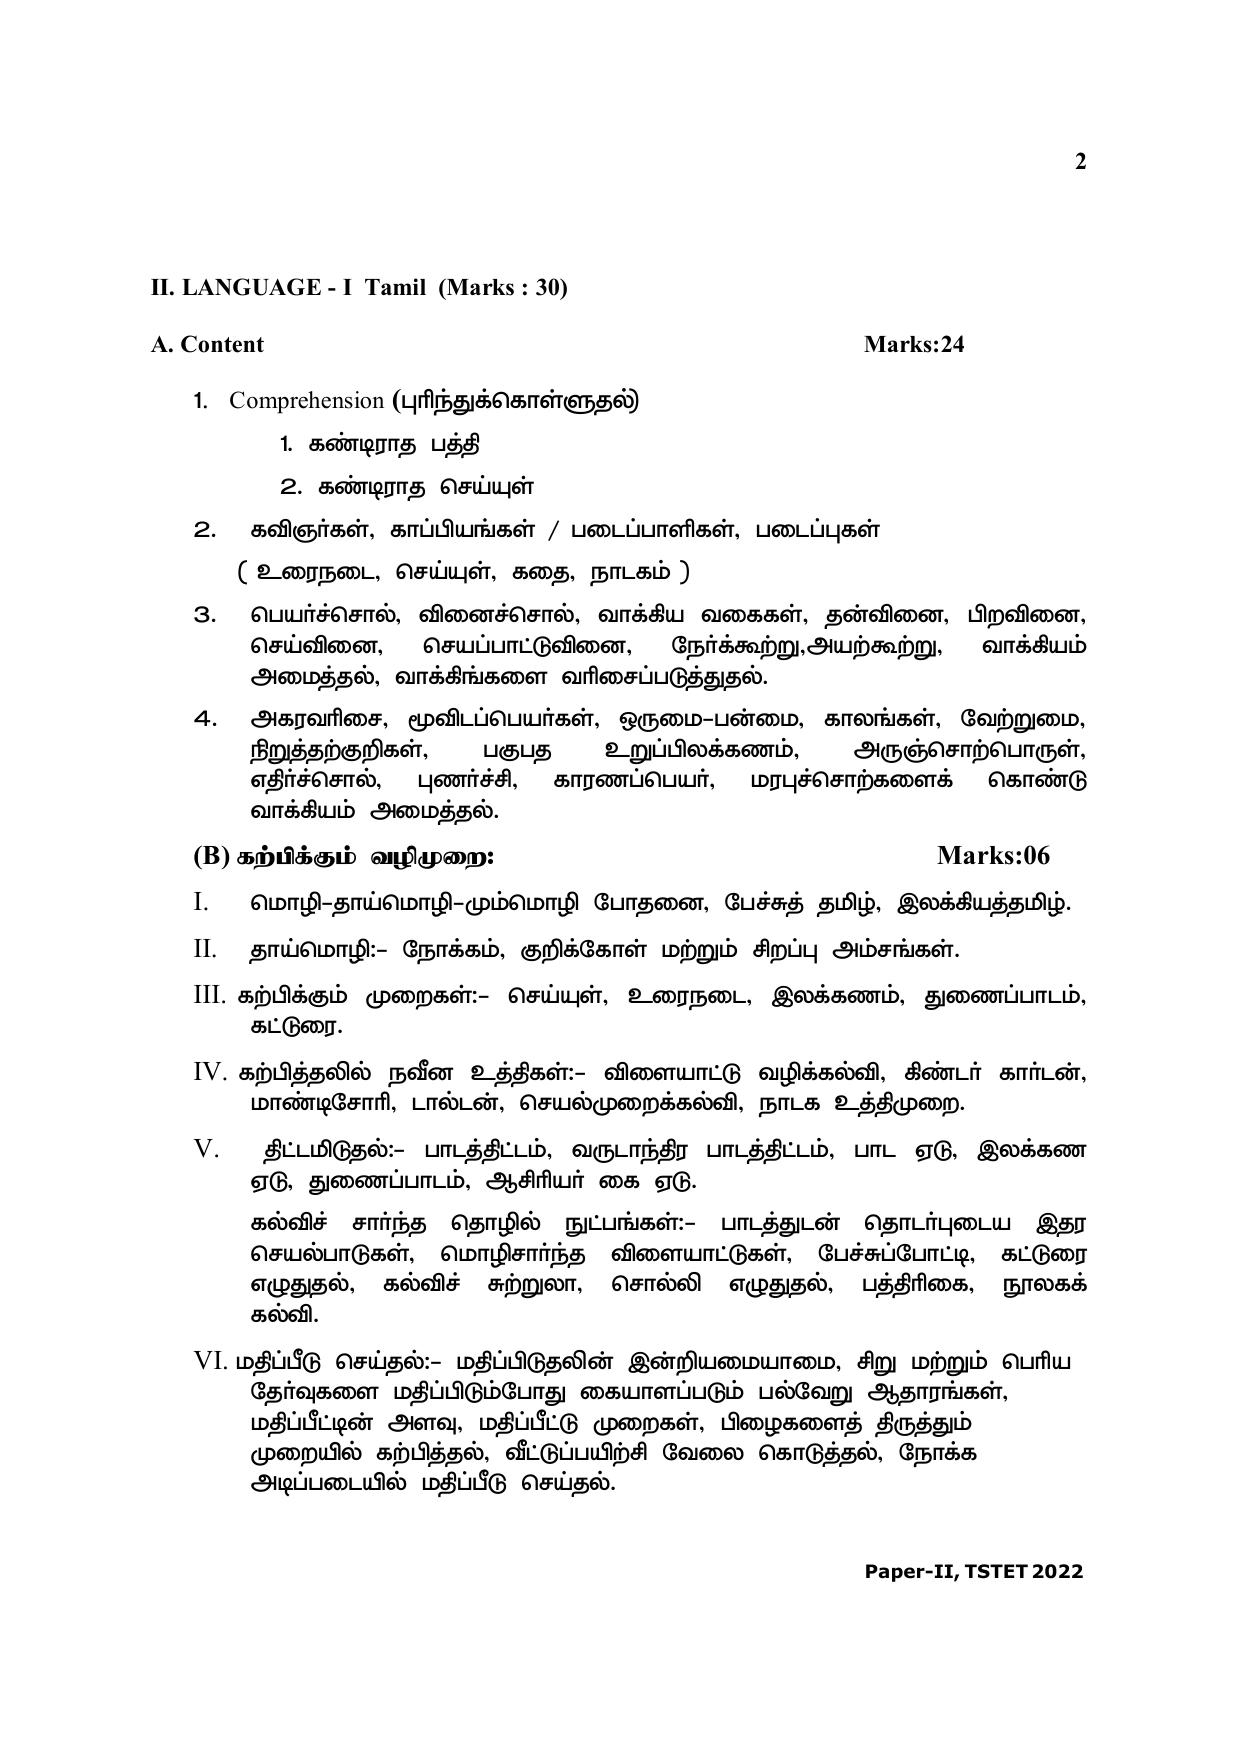 TS TET Syllabus for Paper 2 (Tamil) - Page 2